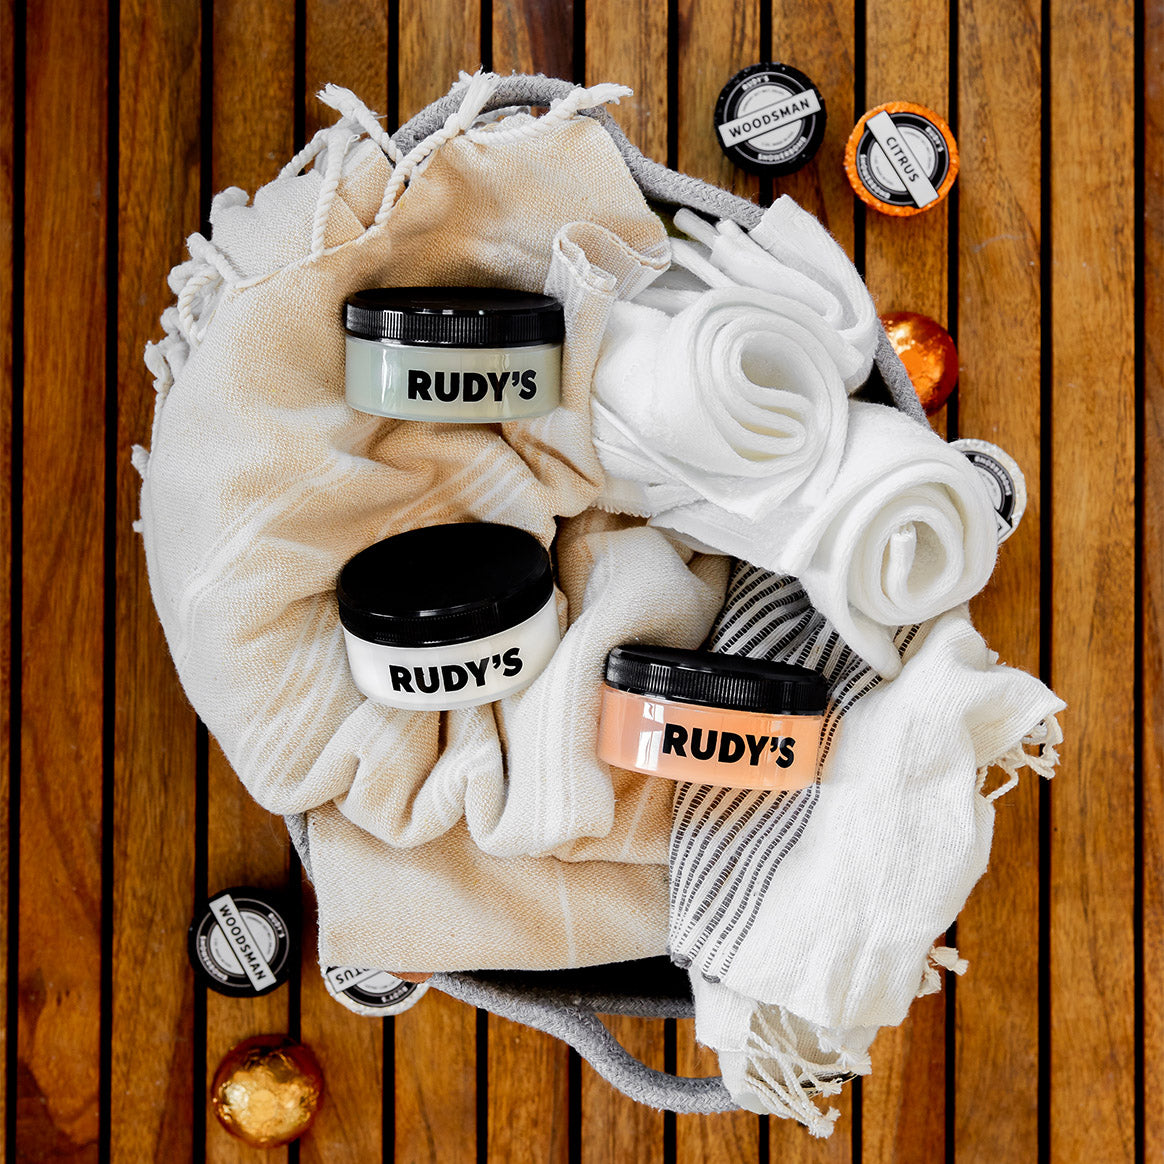 Image of Clay, Matte, and Shine Pomades in basket with towels and shower bombs